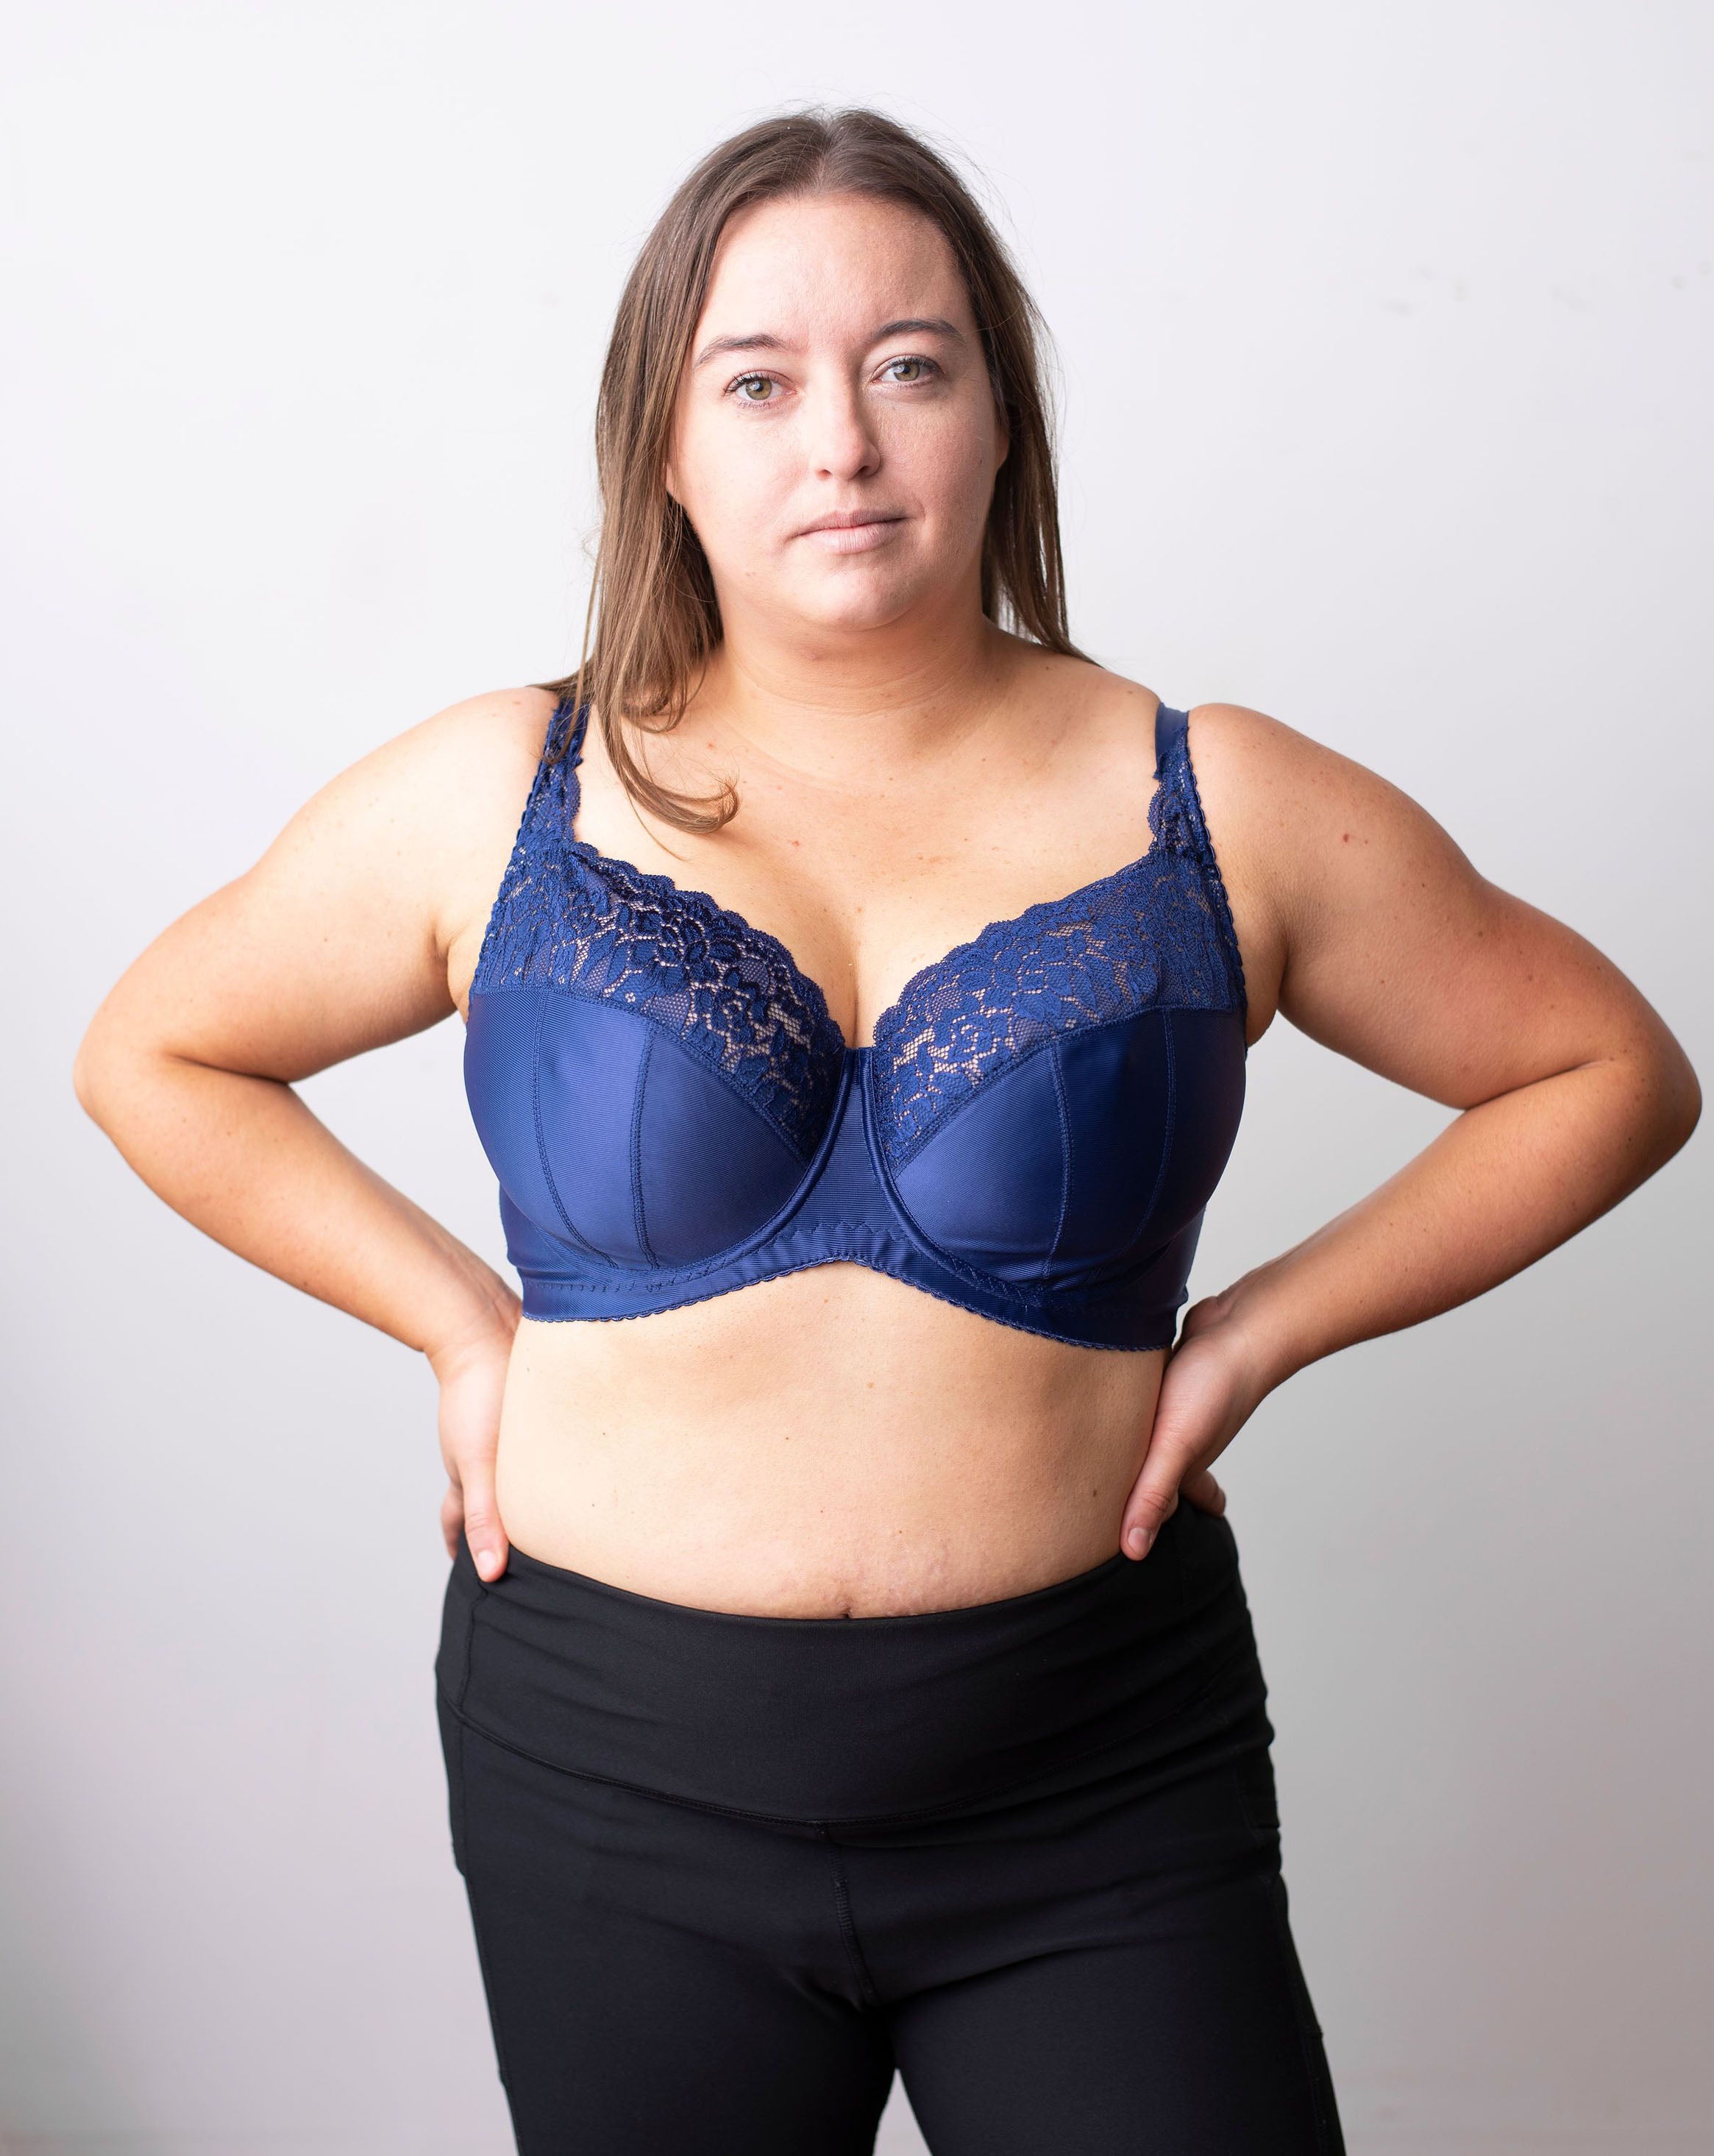 Model with straight brown hair stands with her hands on her waist. She wears a high coverage wired, blue bra. Half body frontal shot in front of a plain white background.